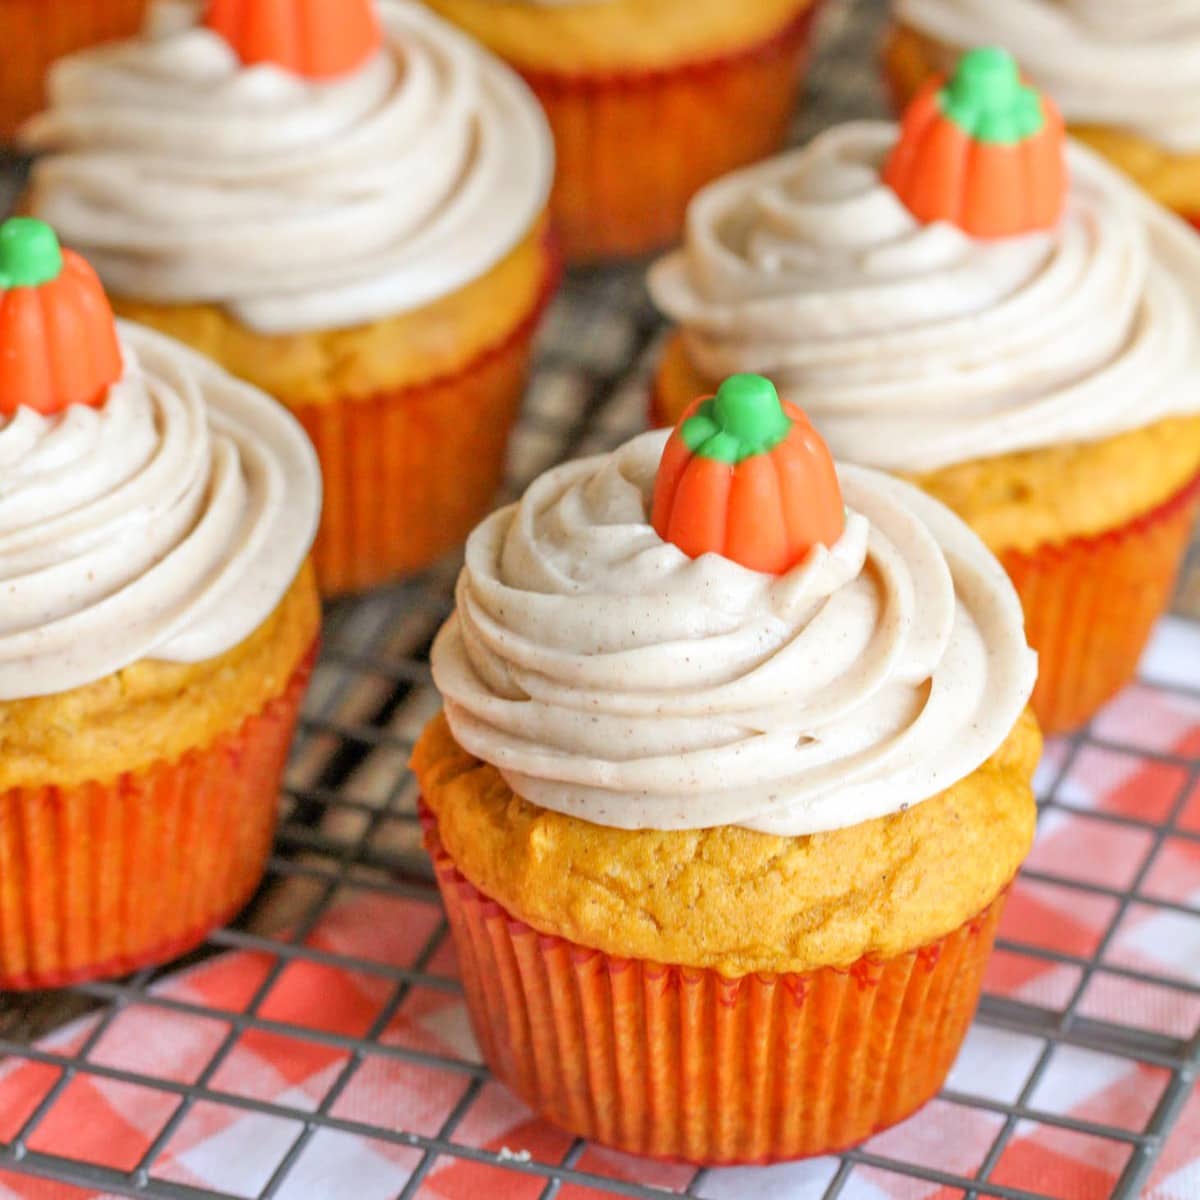 Pumpkin recipes - several easy pumpkin cupcakes topped with frosting and candy pumpkins.